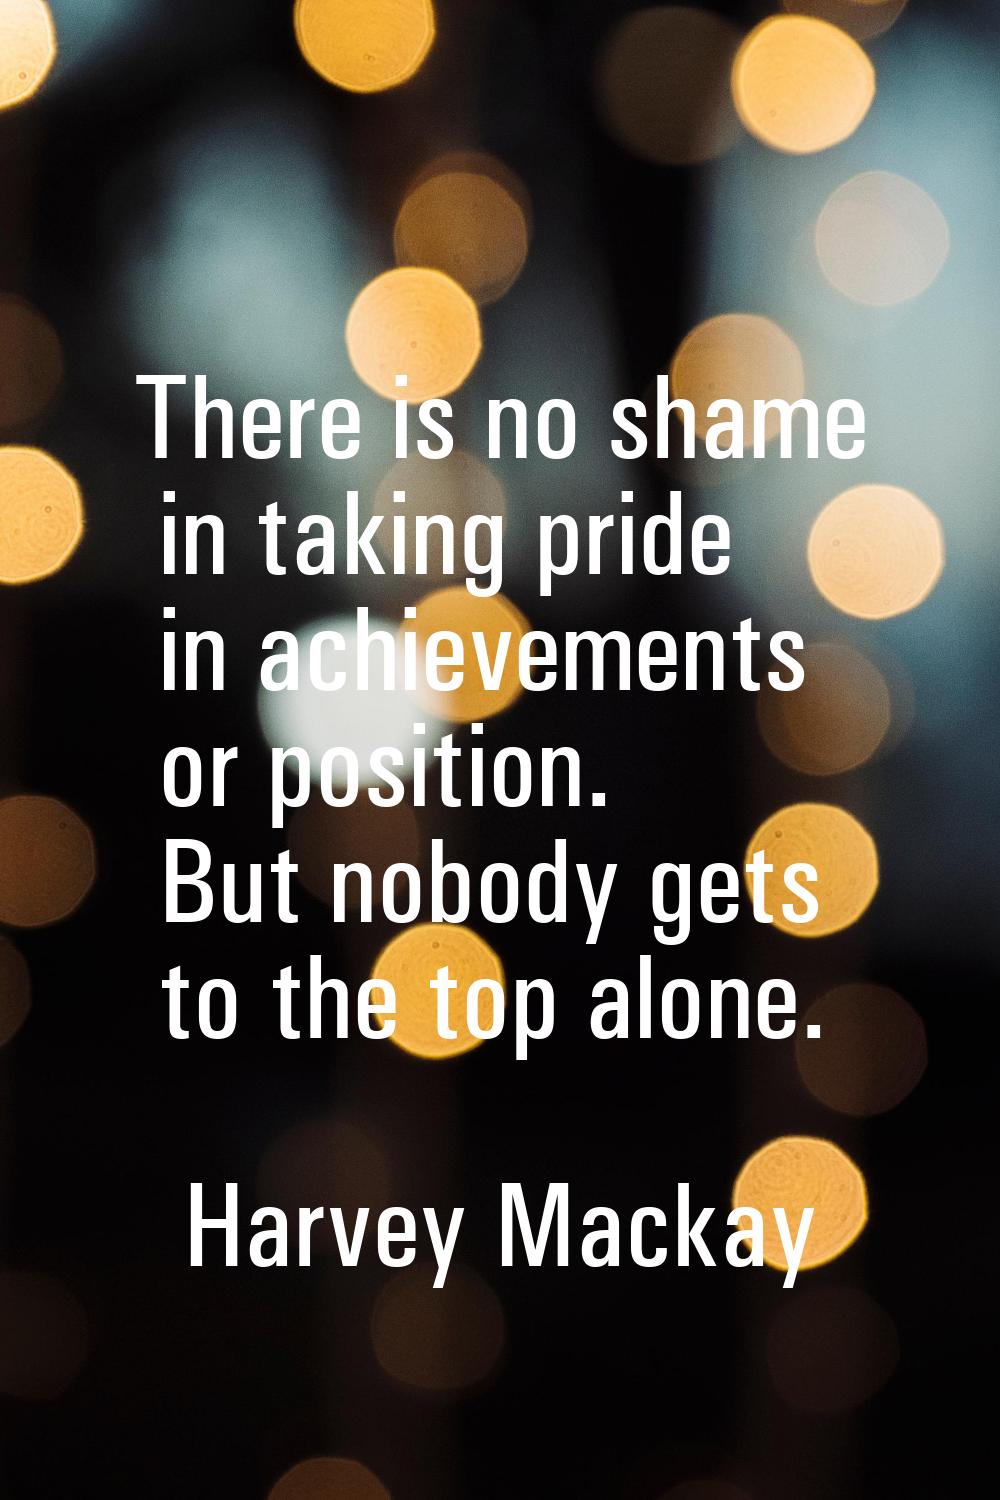 There is no shame in taking pride in achievements or position. But nobody gets to the top alone.